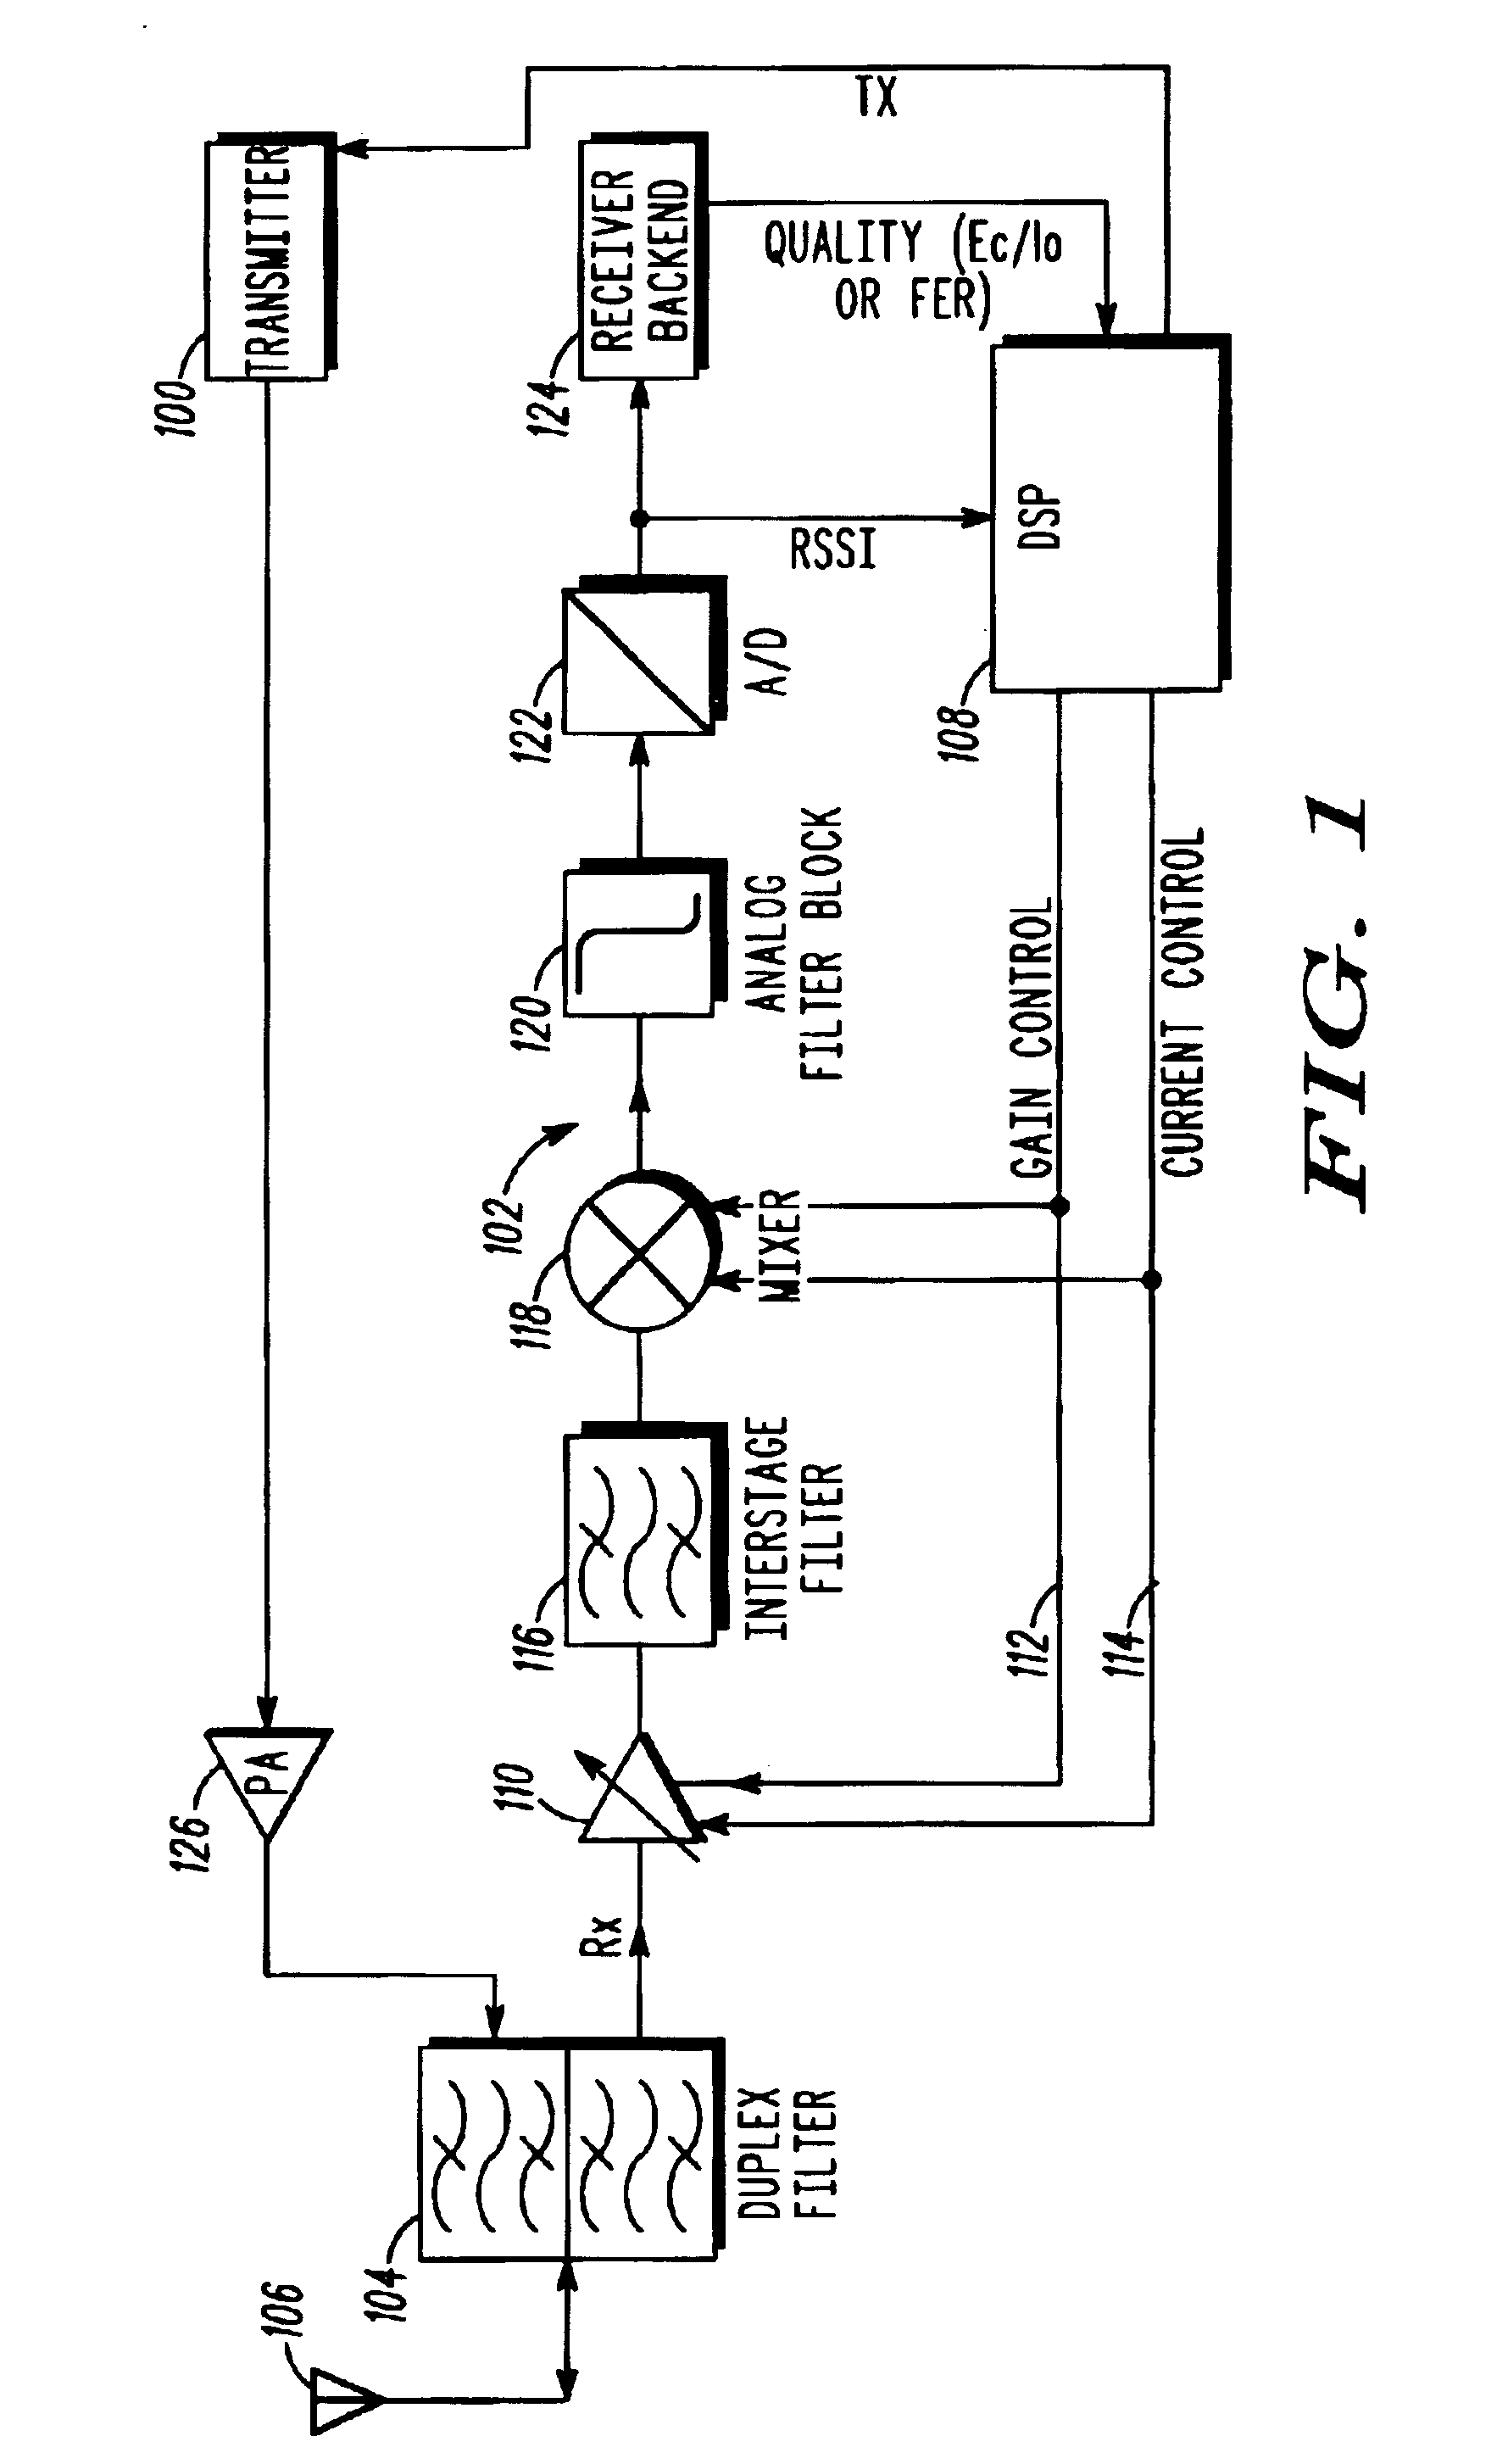 Reduced crossmodulation operation of a multimode communication device